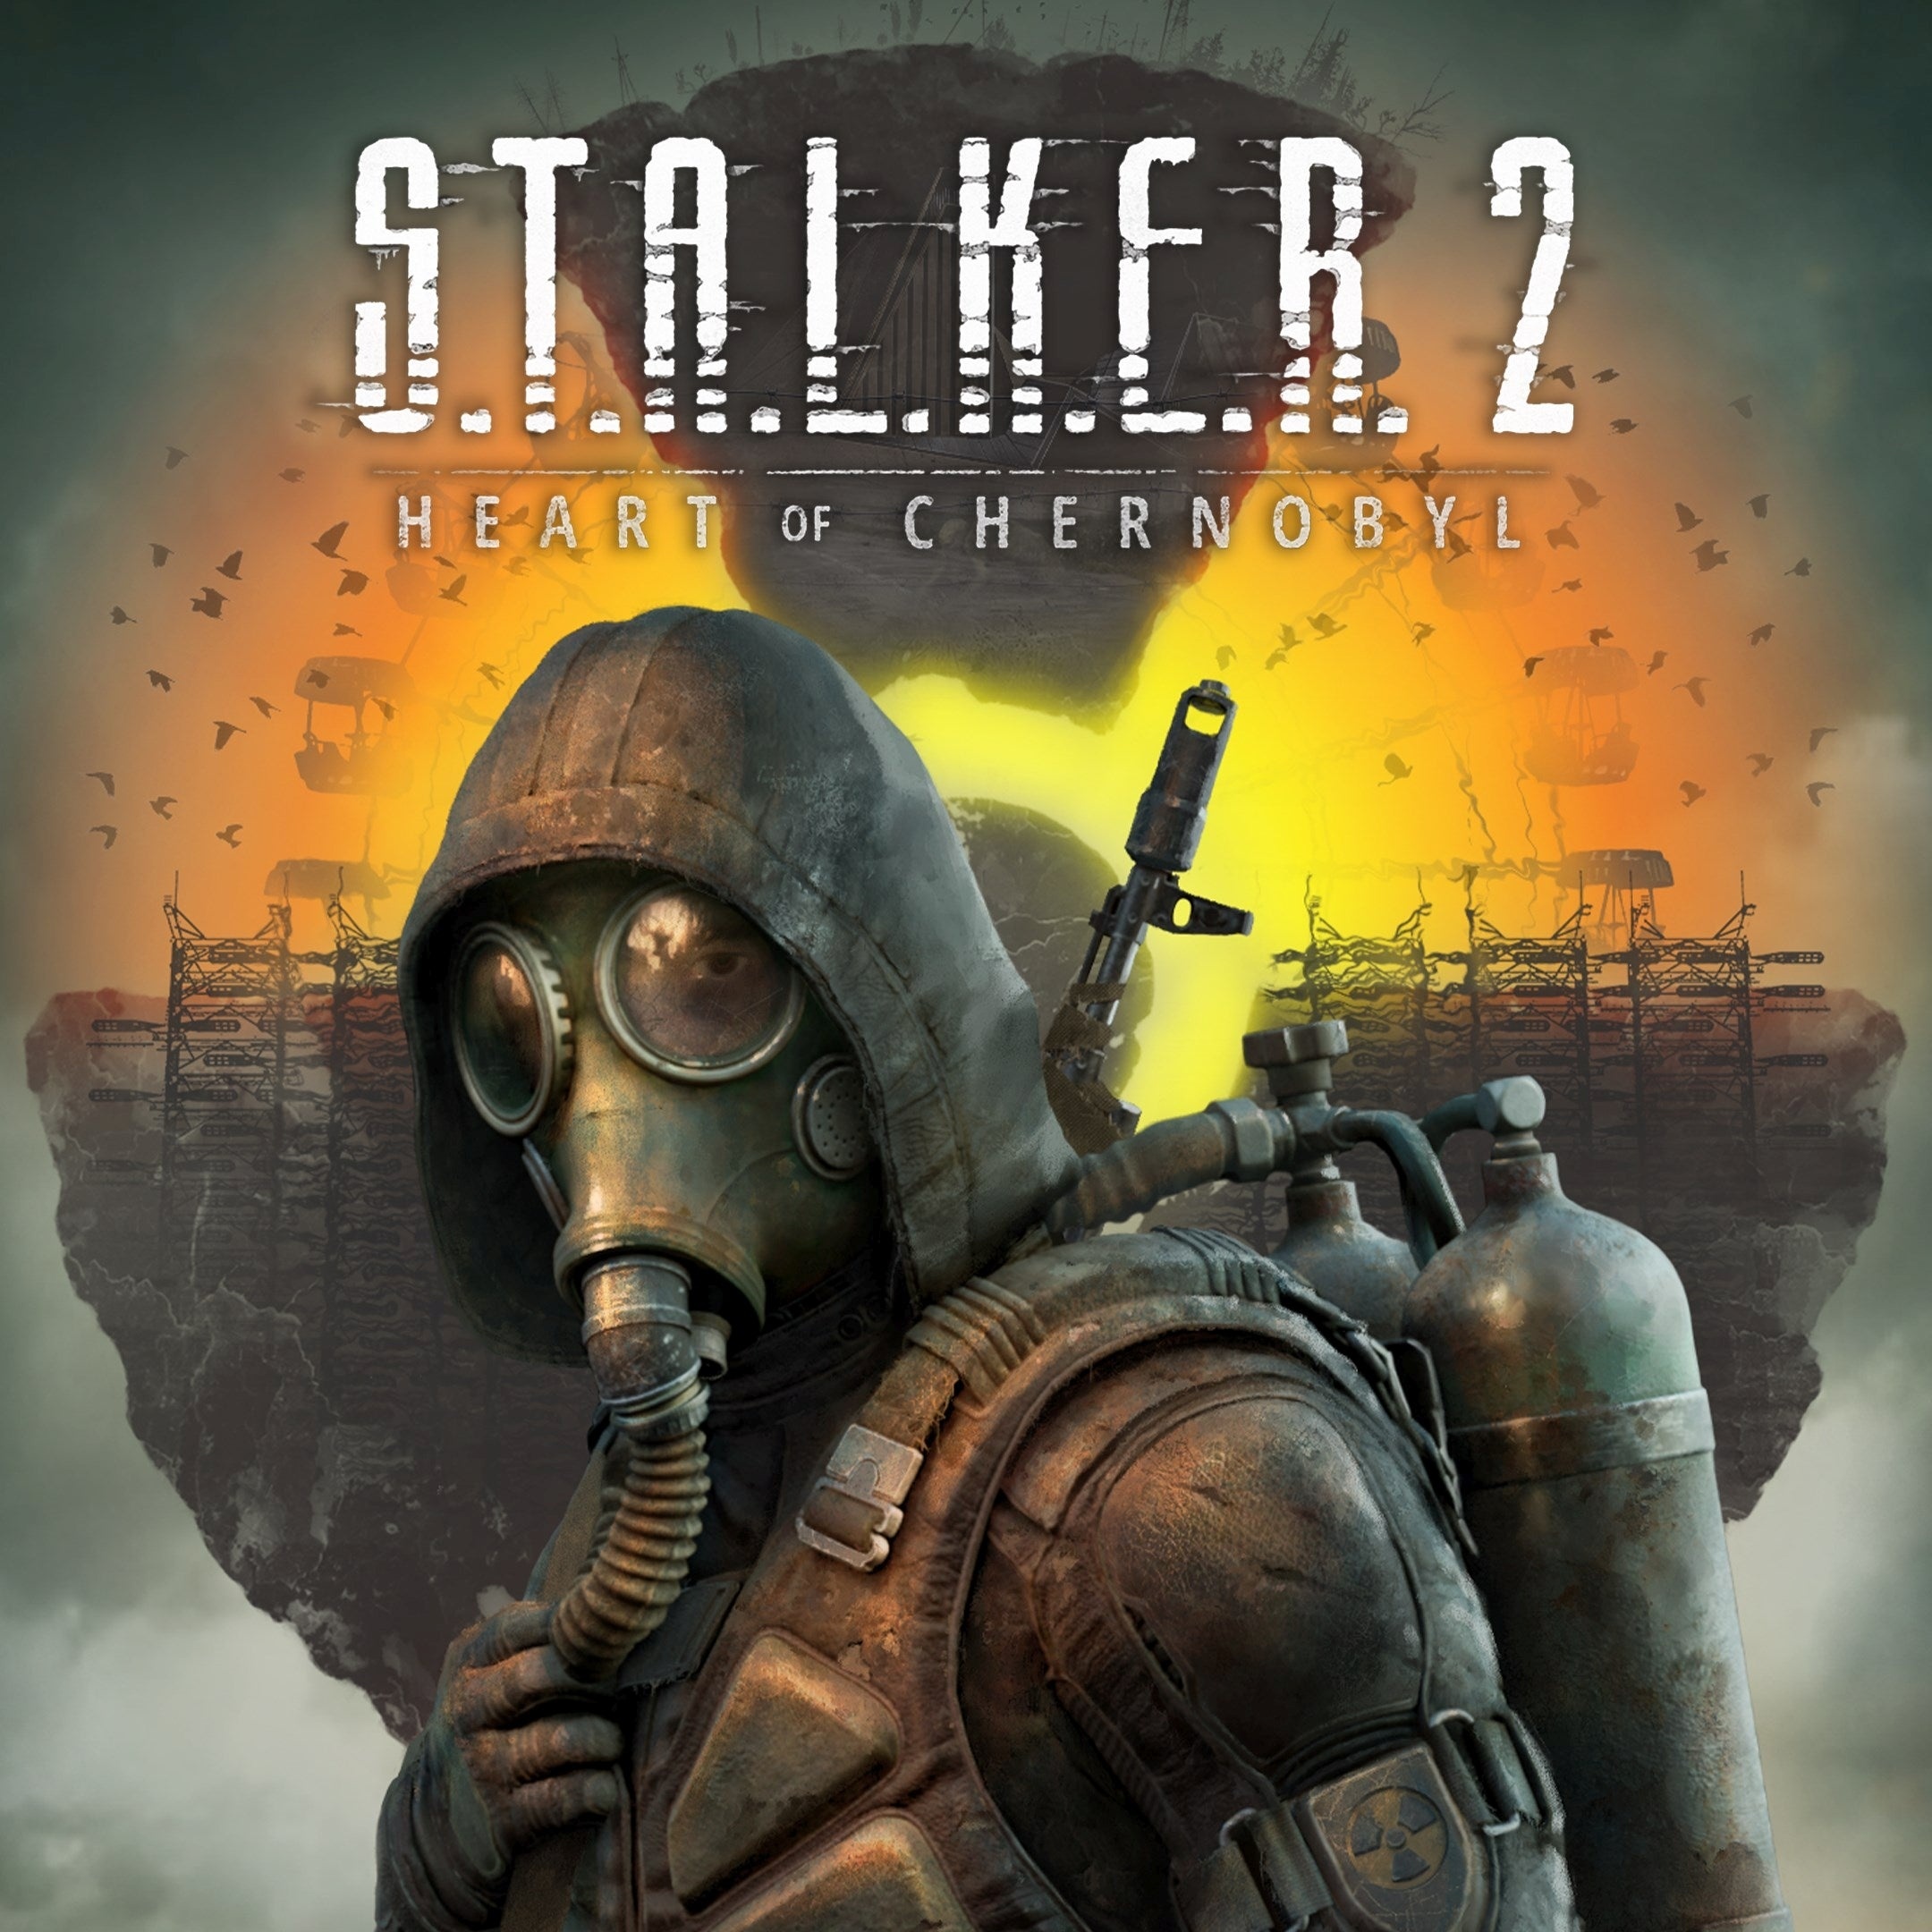 S.T.A.L.K.E.R. 2: Heart of Chornobyl, One of the most awaited action survival video games. 2160x2160 HD Wallpaper.